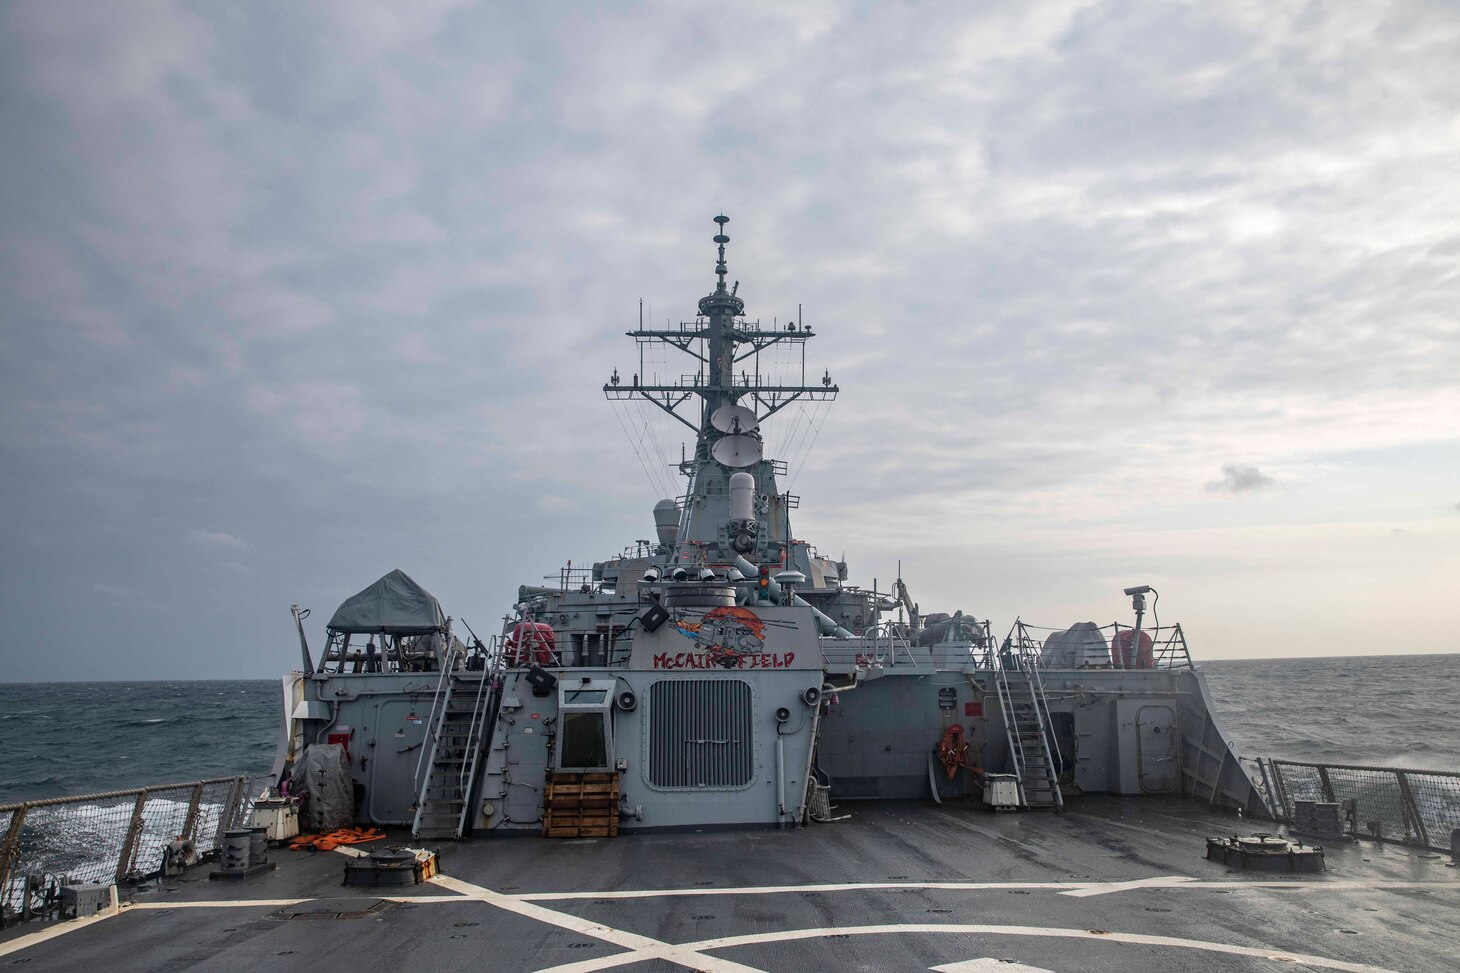 210407-N-HI376-1088 TAIWAN STRAIT (April 7, 2021) The Arleigh Burke-class guided-missile destroyer USS John S. McCain (DDG 56) transits the South China Sea during routine underway operations. John S. McCain is forward-deployed to the U.S. 7th Fleet area of operations in support of a free and open Indo-Pacific. (U.S. Navy photo by Mass Communication Specialist 1st Class Jeremy Graham)